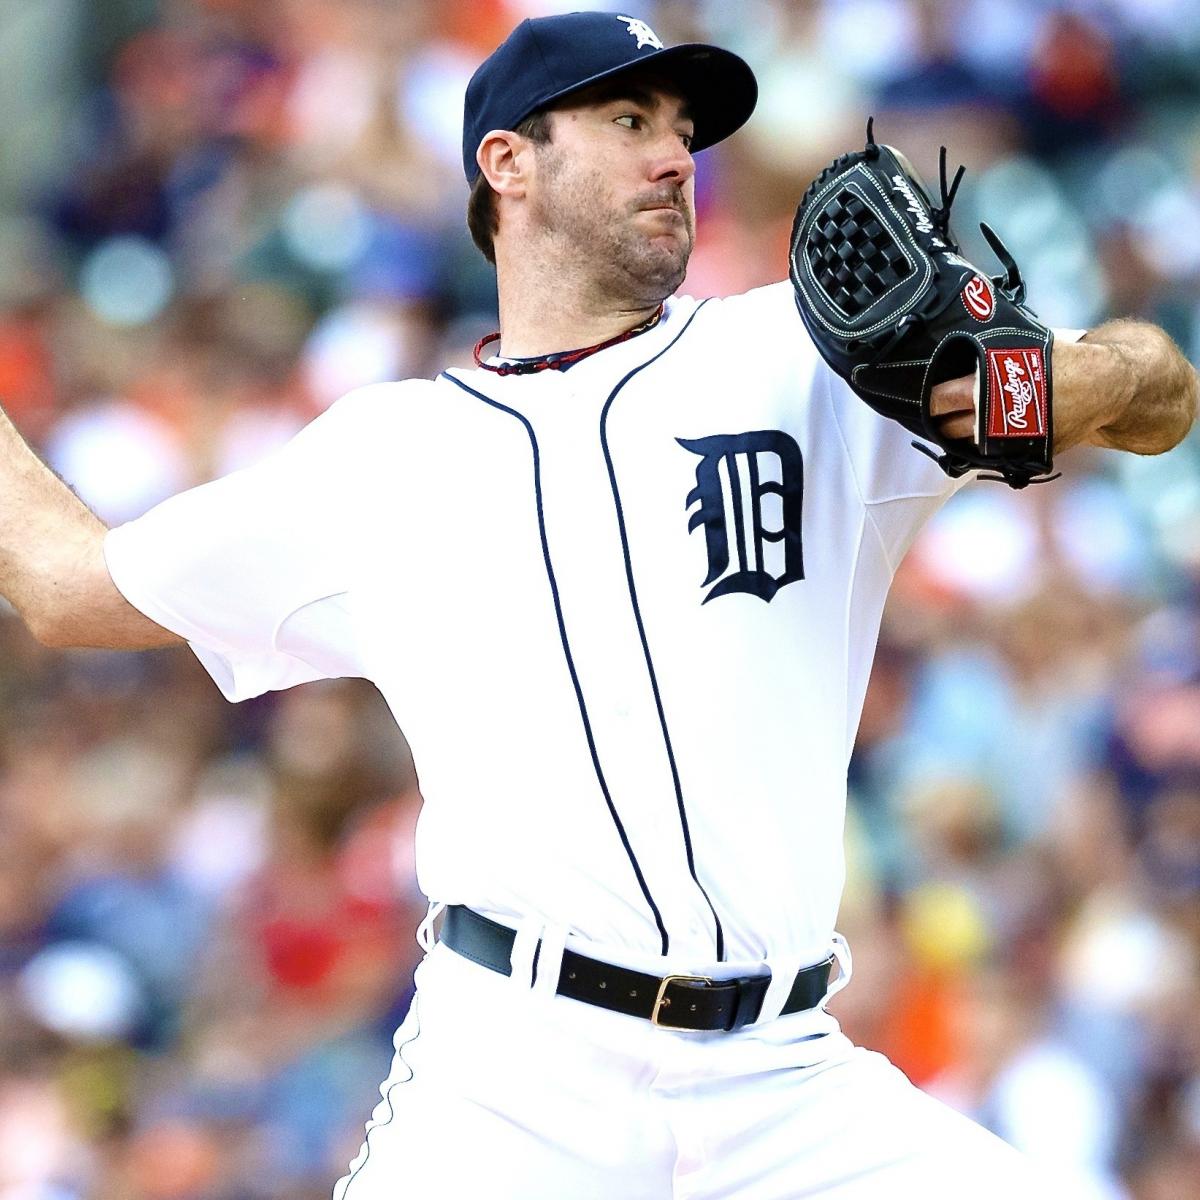 Justin Verlander's MuchNeeded Win to Sweep A's Puts Tigers Back Among